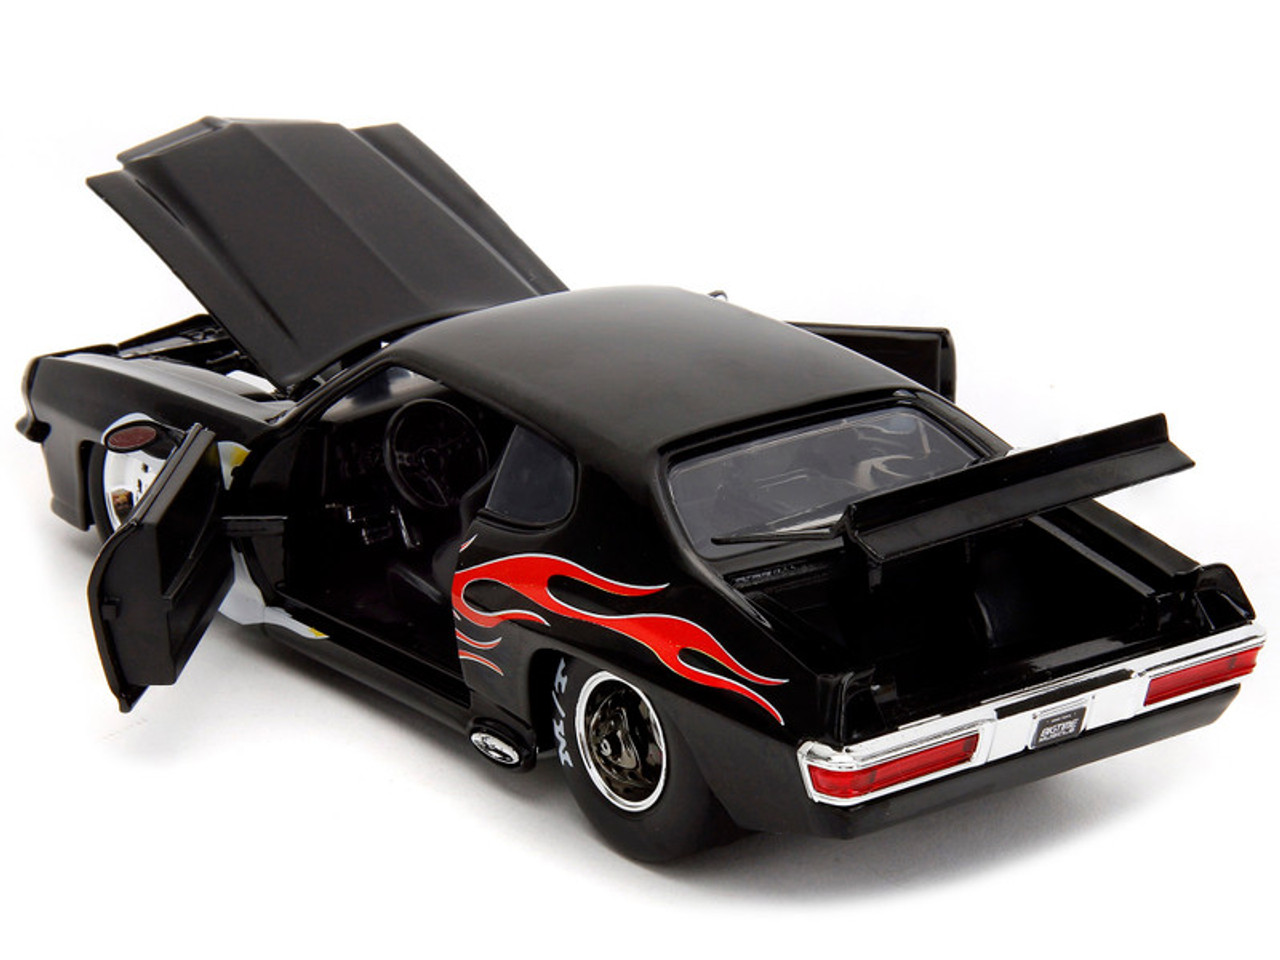 1971 Pontiac GTO Black with Flame Graphics "Bigtime Muscle" Series 1/24 Diecast Model Car by Jada